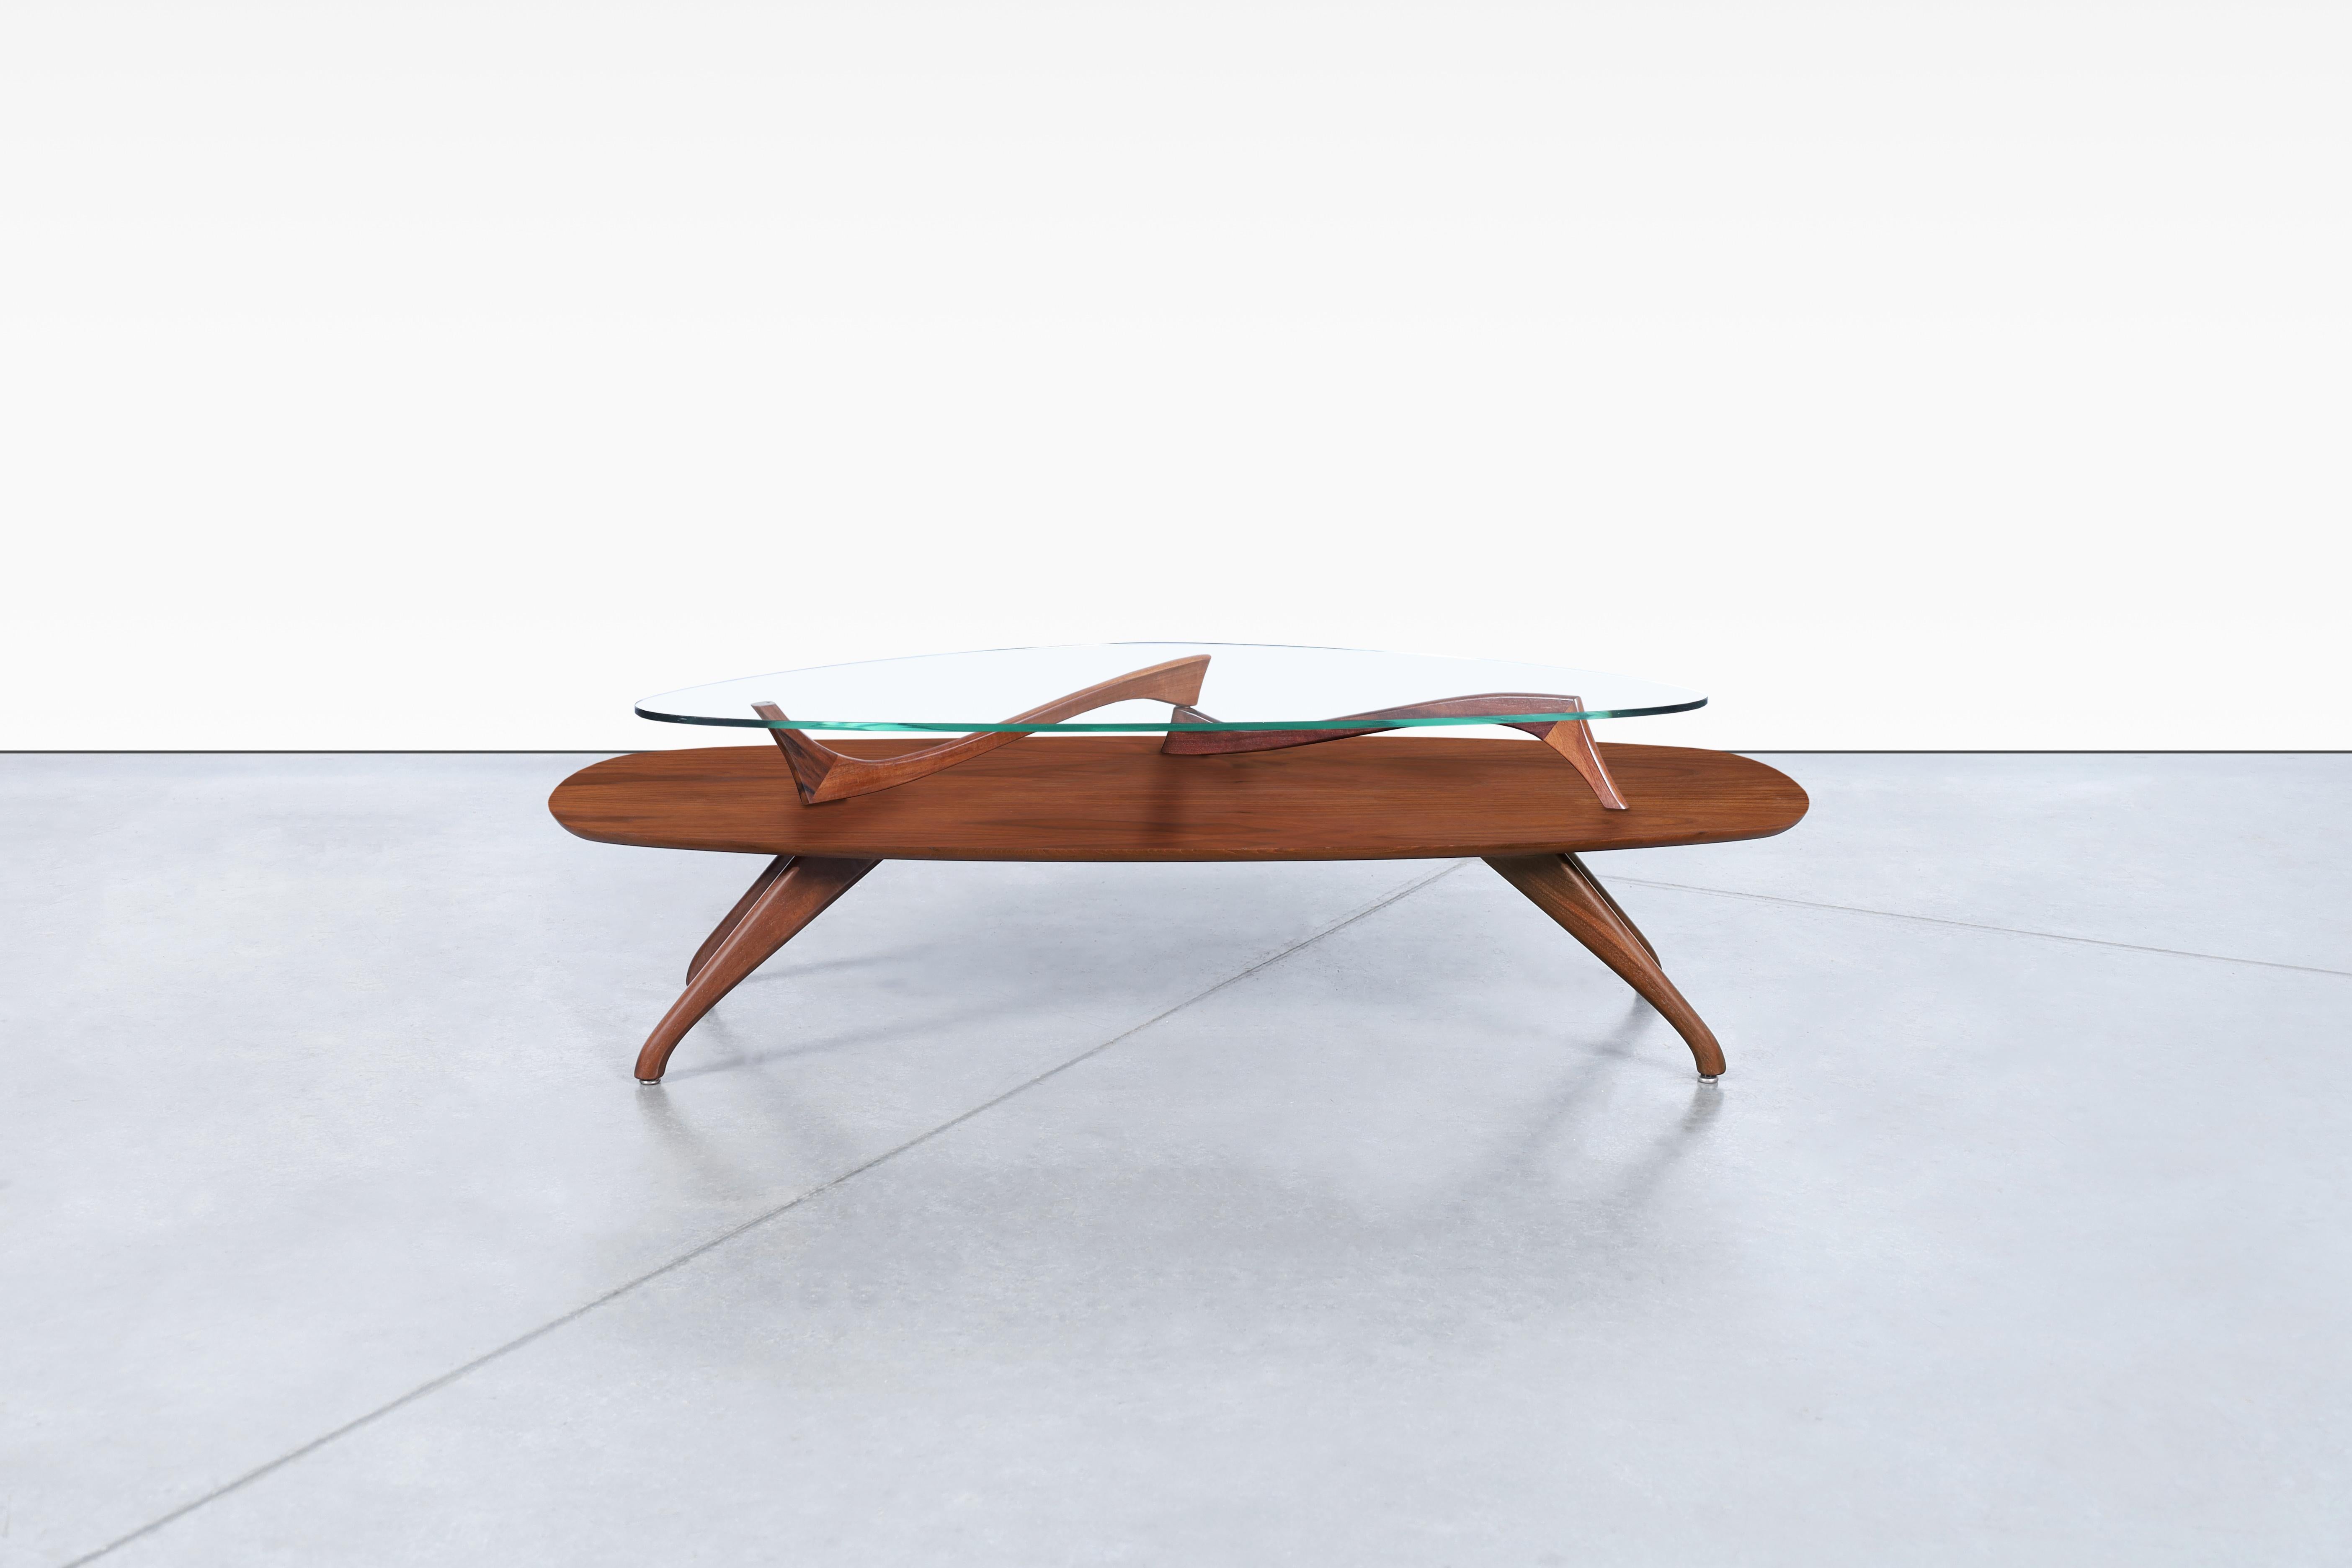 This stunning vintage sculptural walnut coffee table is a true masterpiece of design. Its two-tiered structure features a large surfboard-shaped top made of beautiful walnut wood, with a solid walnut detail shape sandwiched between the top and the